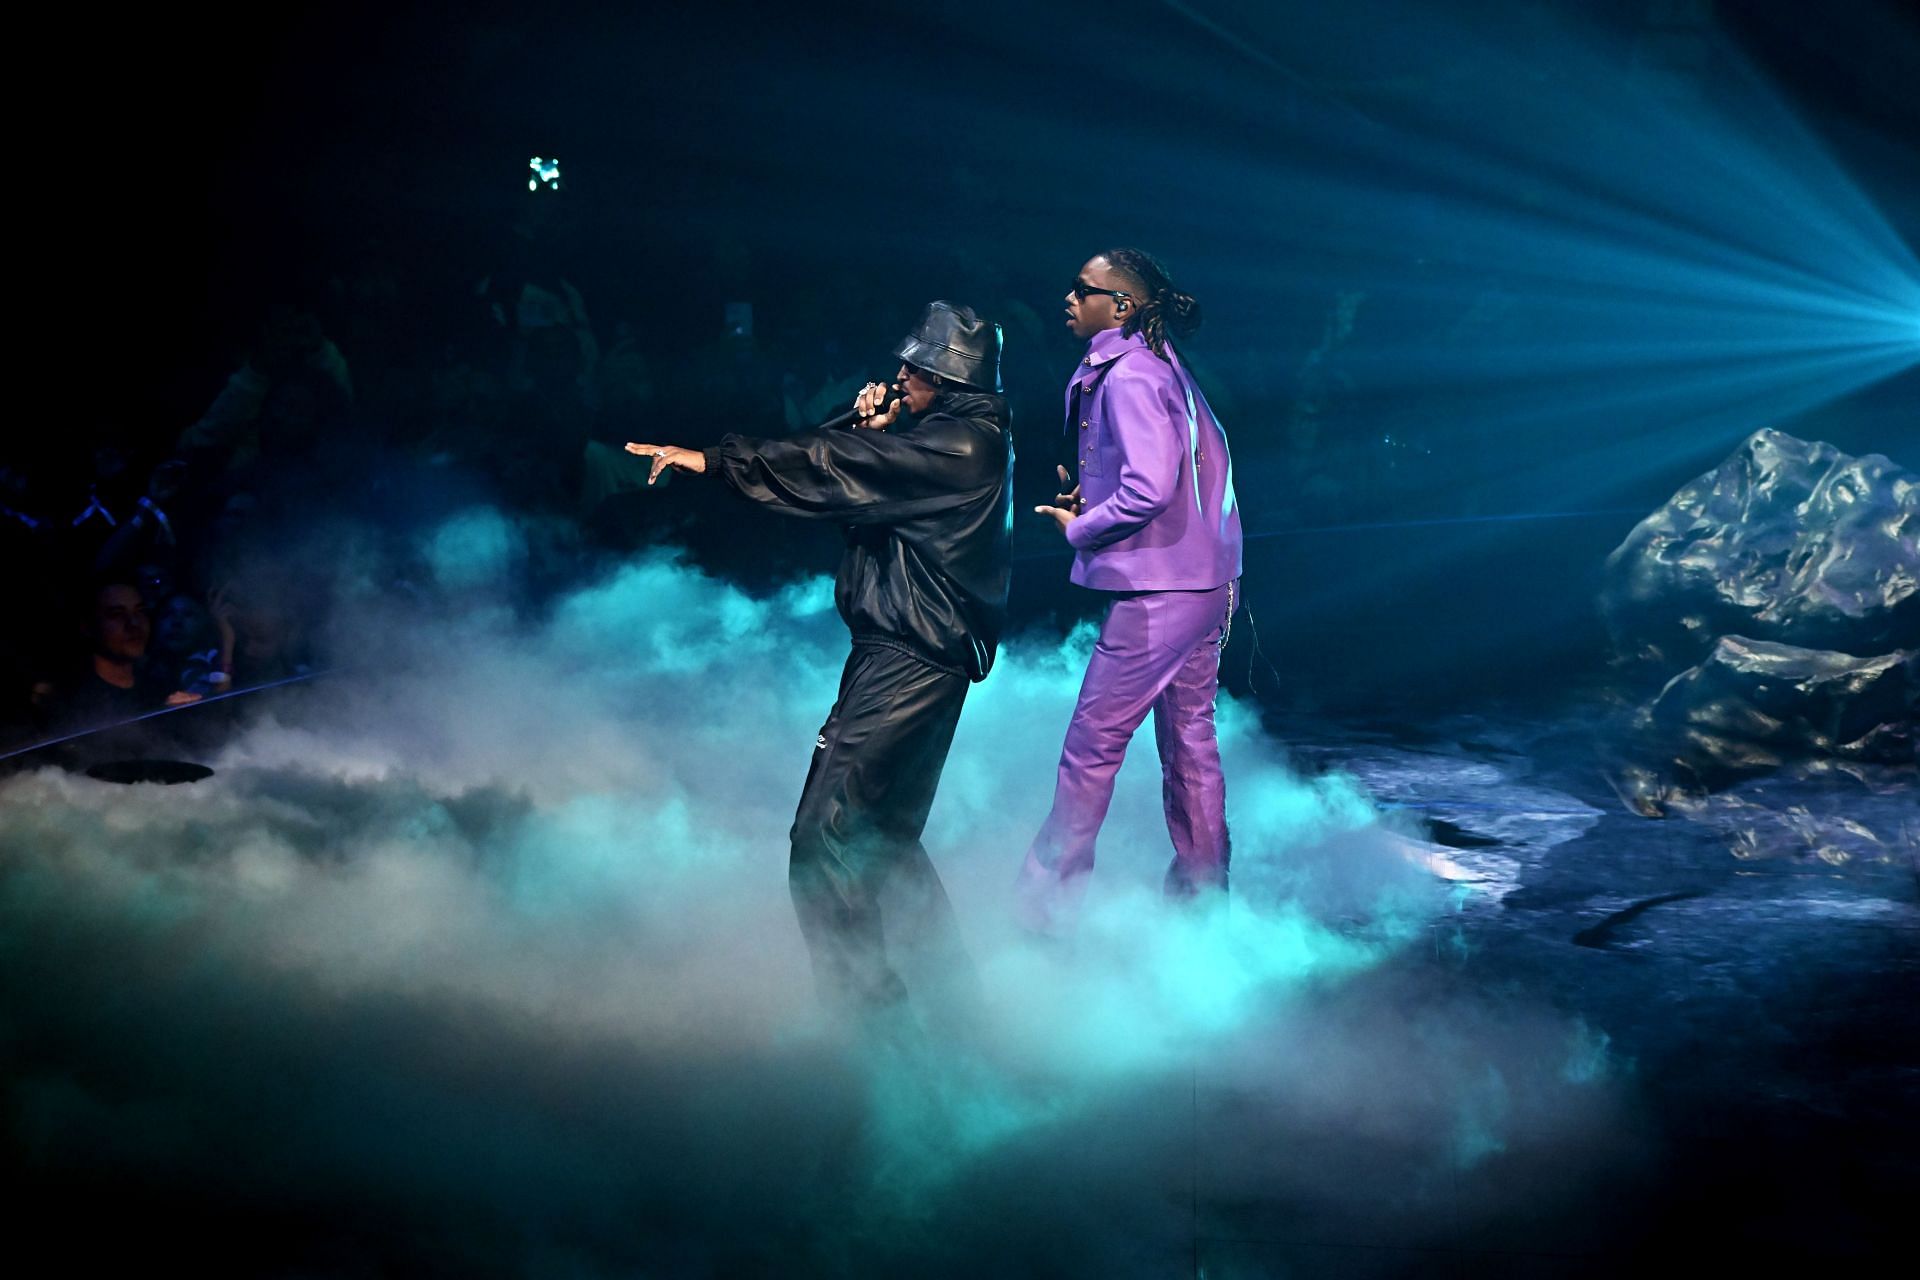 Future and Metro Boomin perform onstage during the 2023 MTV Video Music Awards at Prudential Center on September 12, 2023 in Newark, New Jersey. (Photo by Noam Galai/Getty Images)